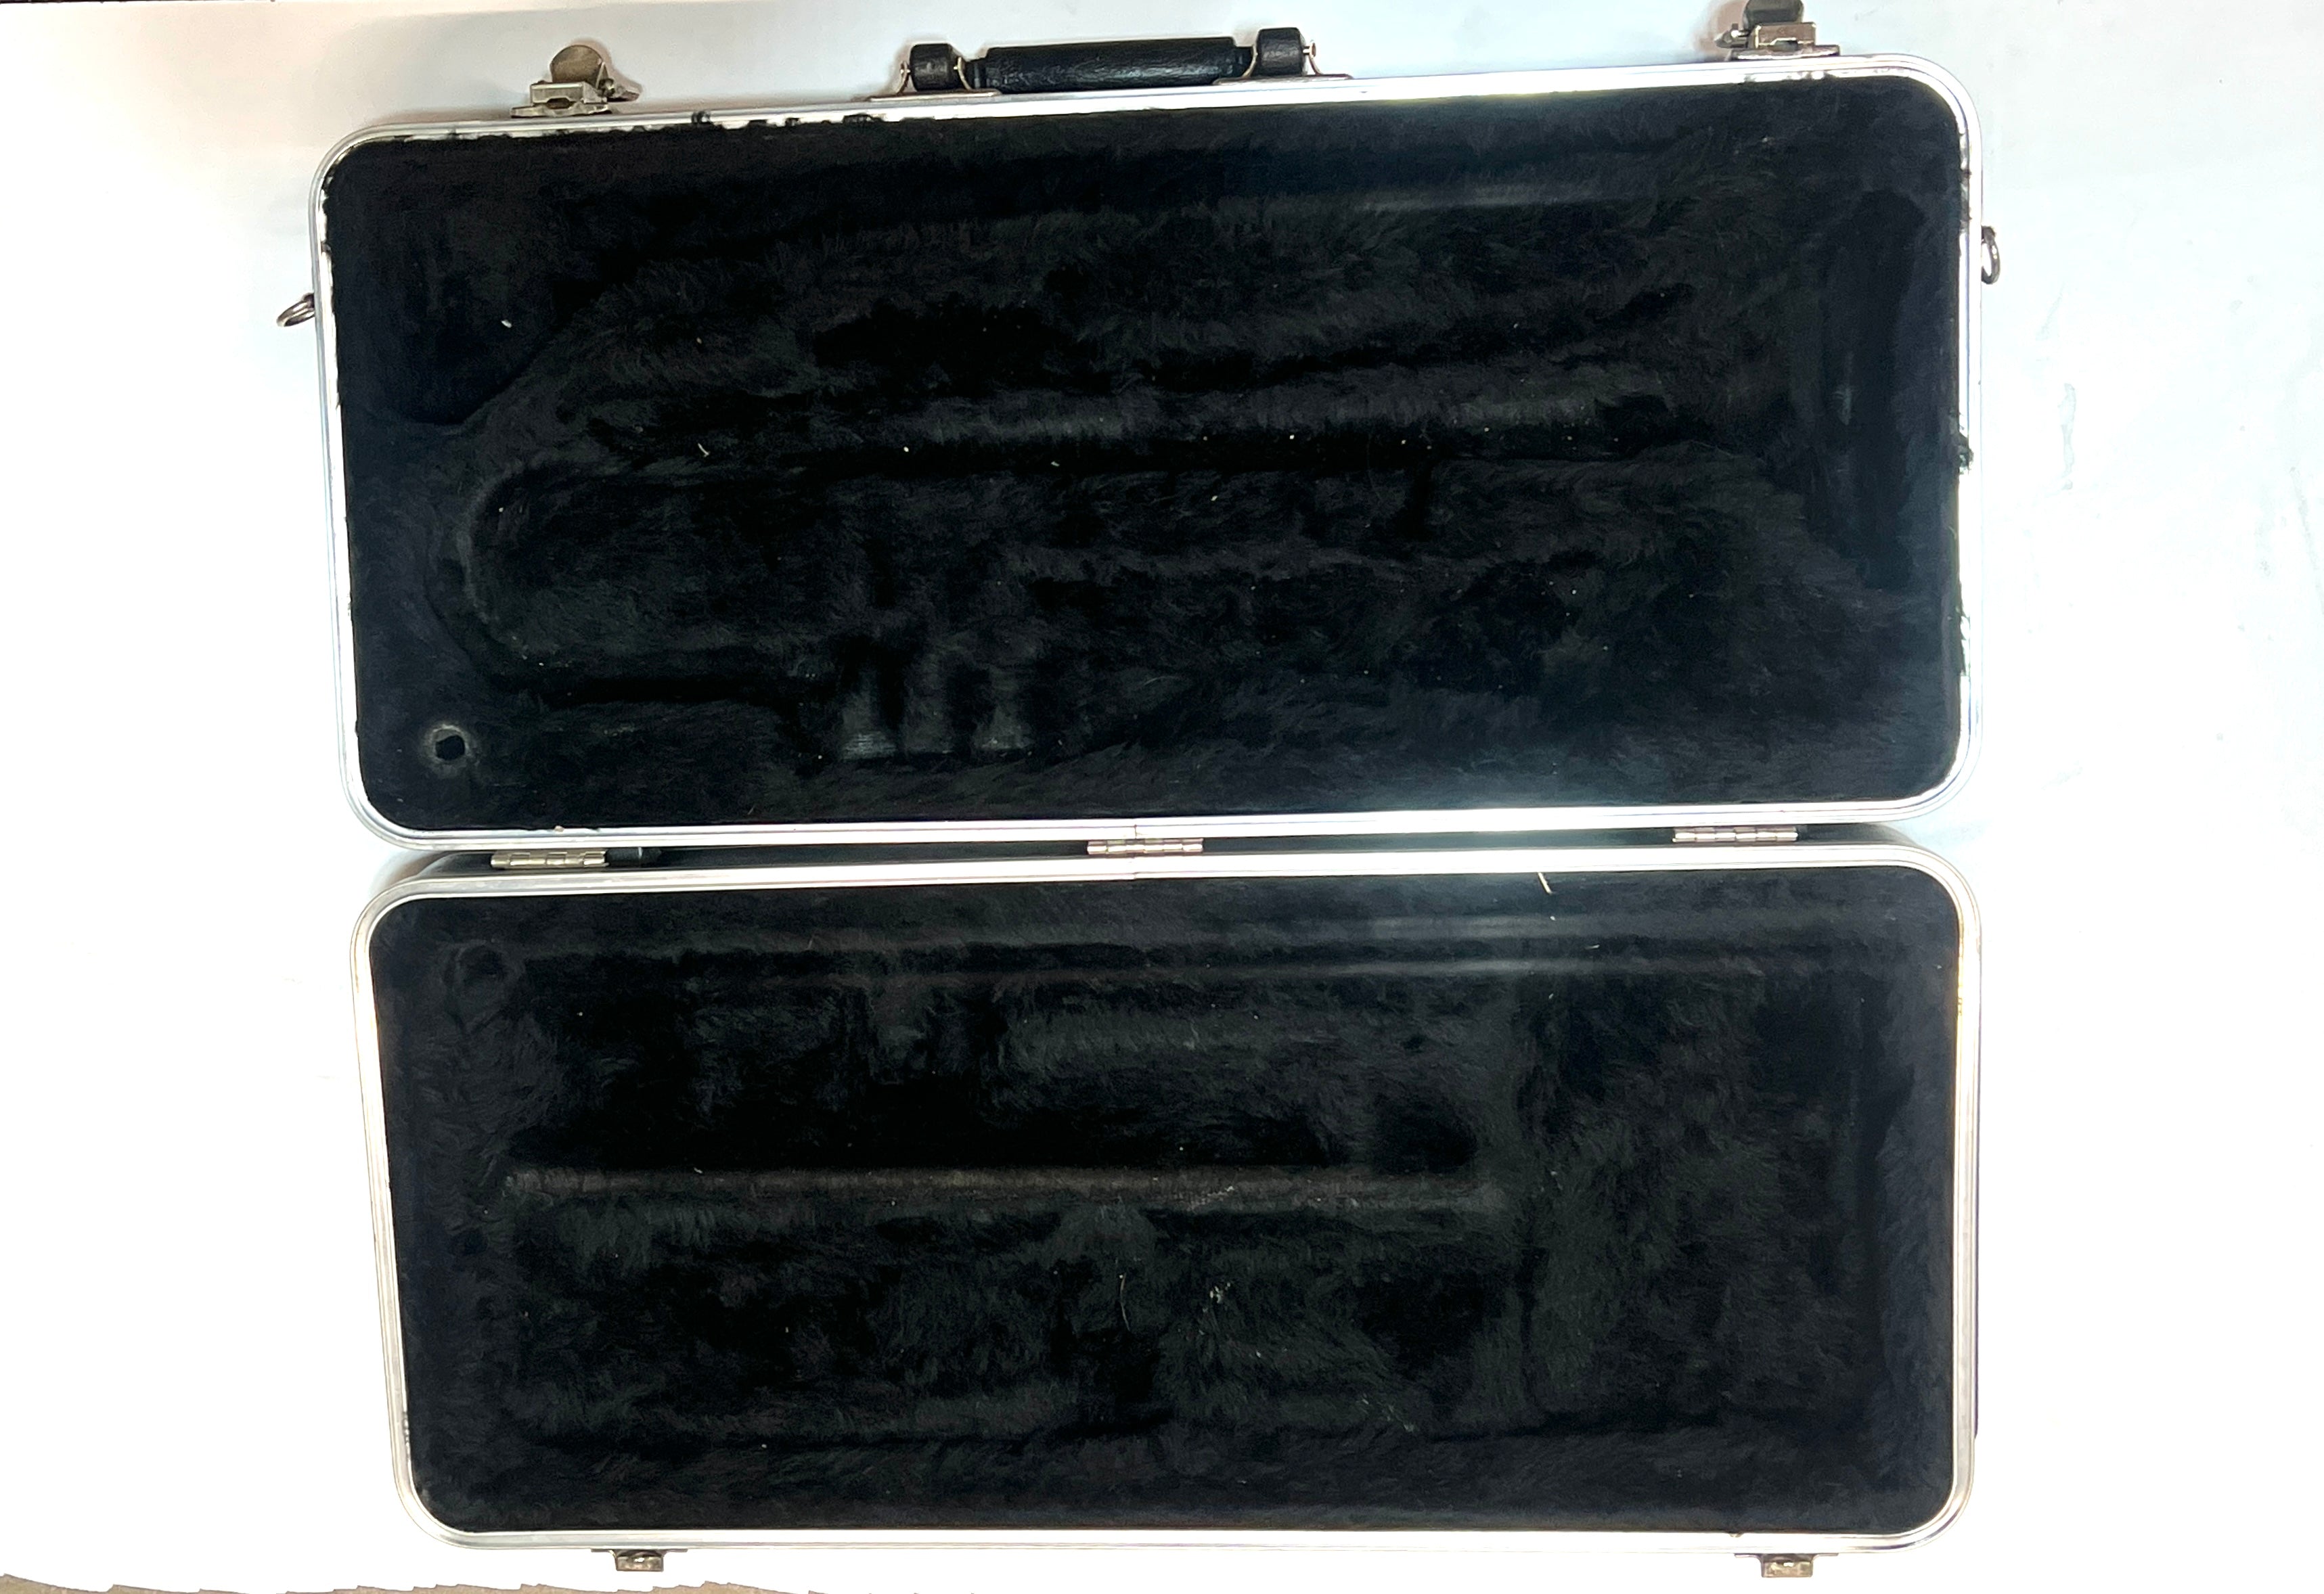 Kanstul Trumpet Case scuffs on outside latches work well good case USED